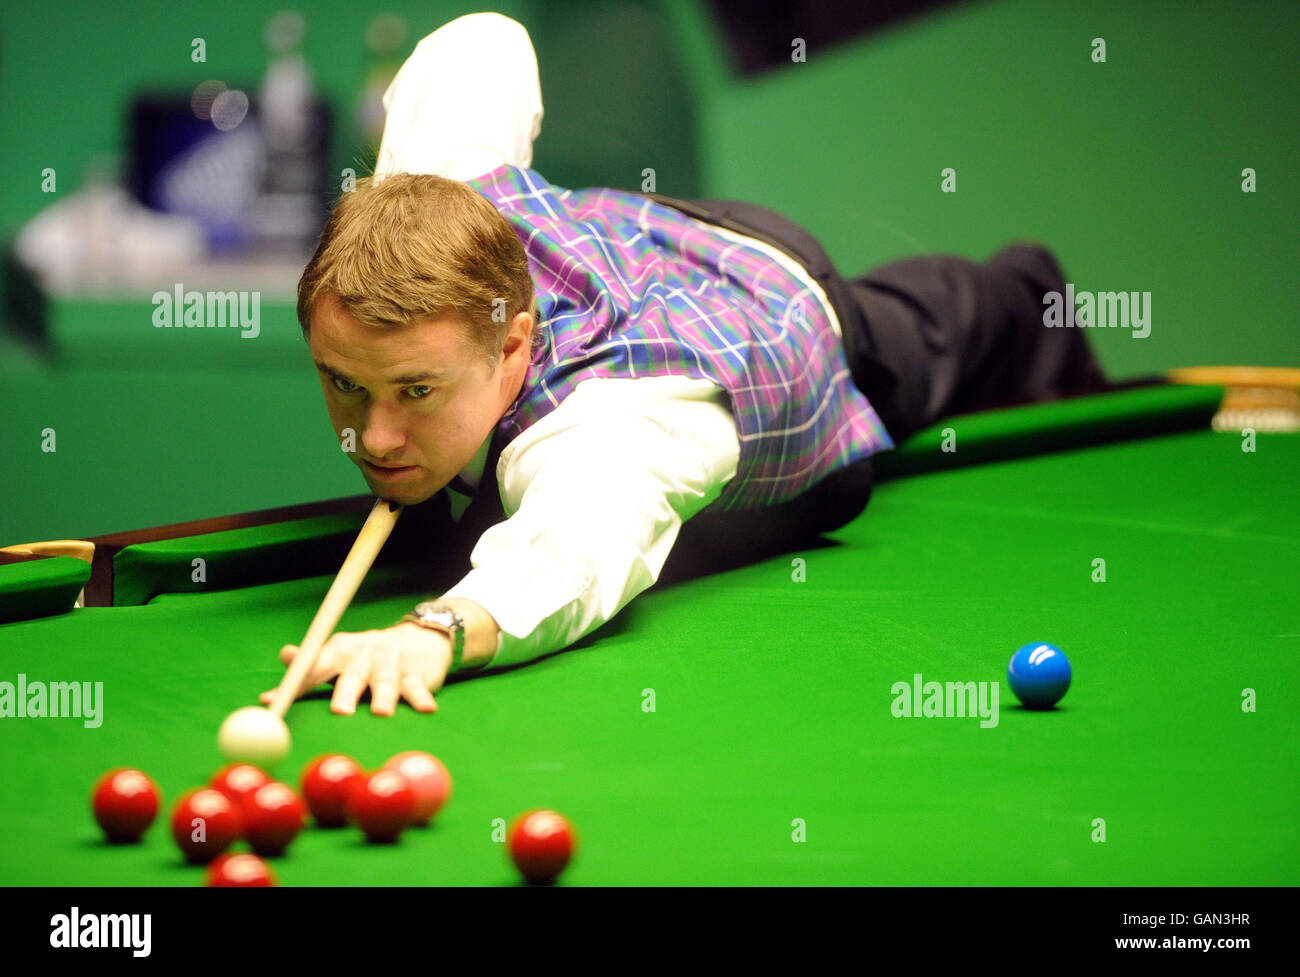 Stephen table semi final match world snooker championship crucible theatre hi-res stock photography and images